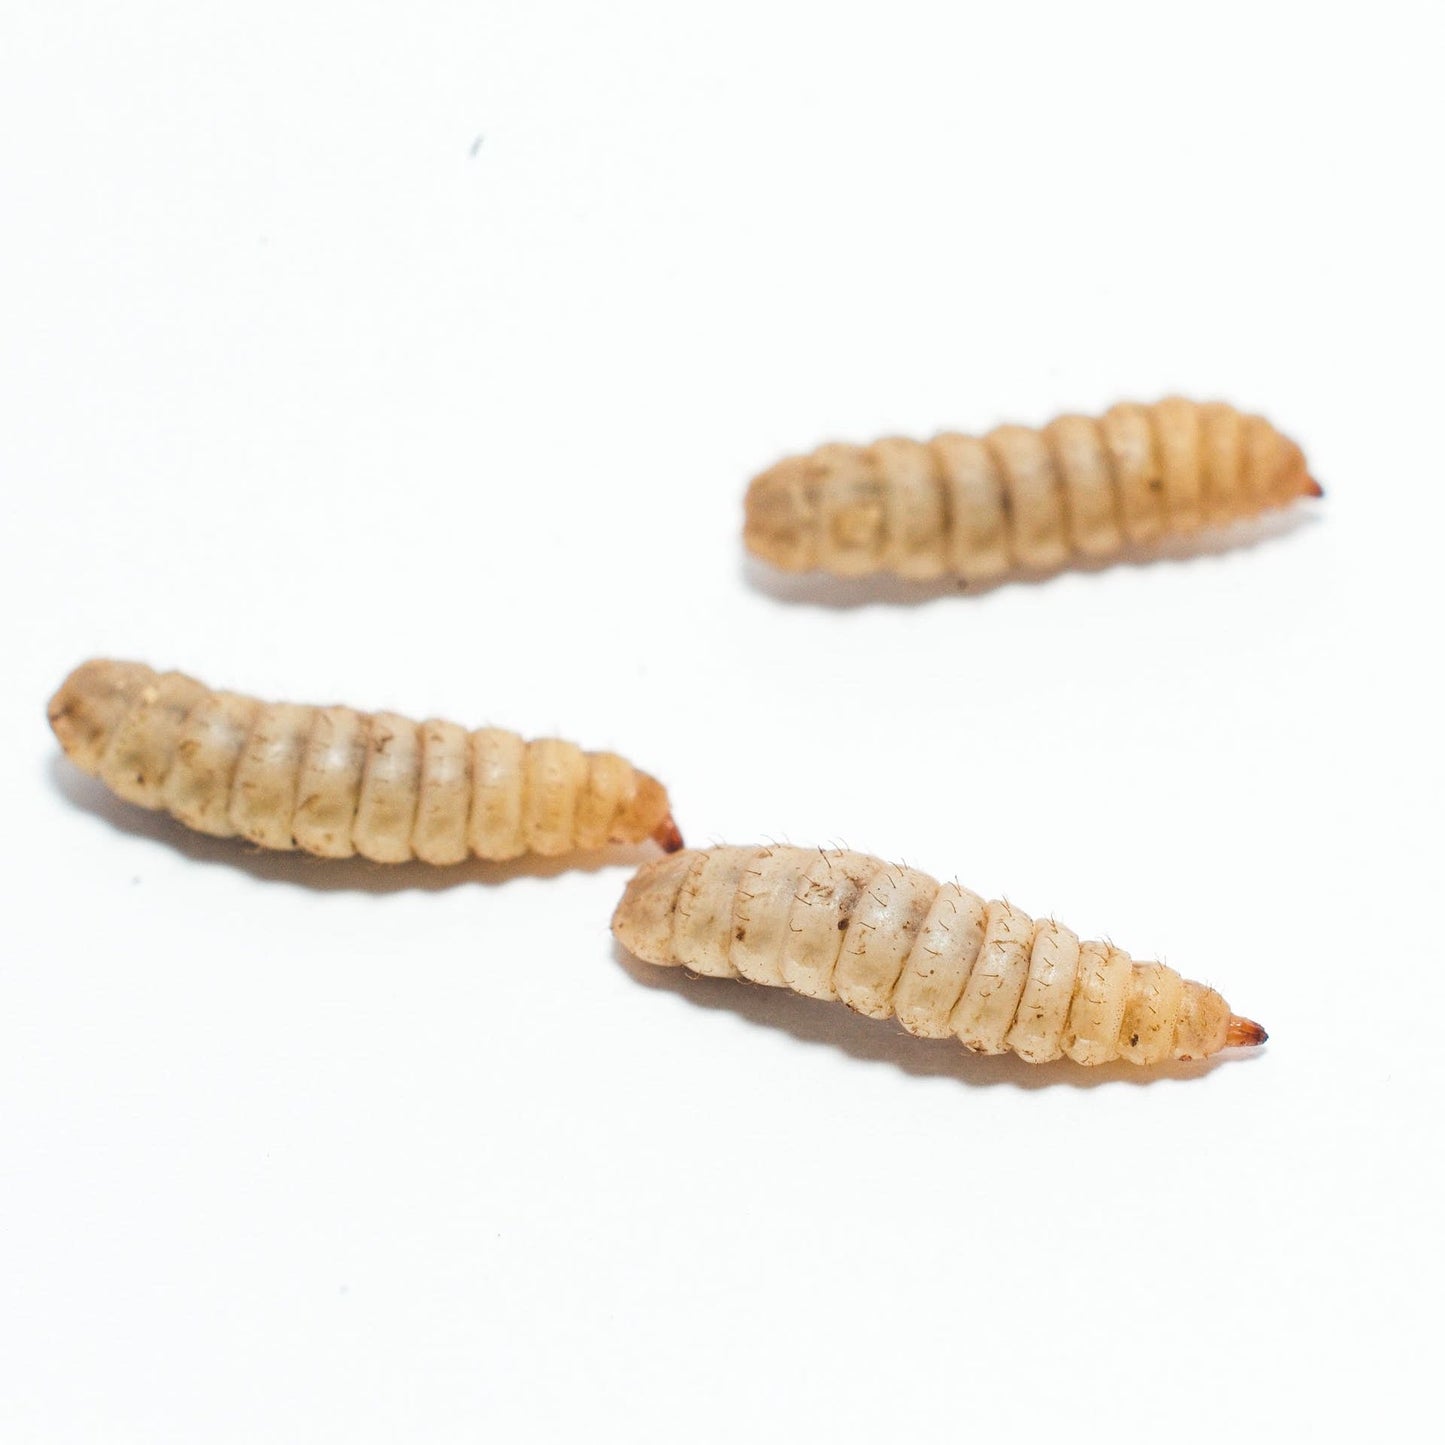 Live BSF Larvae 250g - Fortnightly FREE DELIVERY